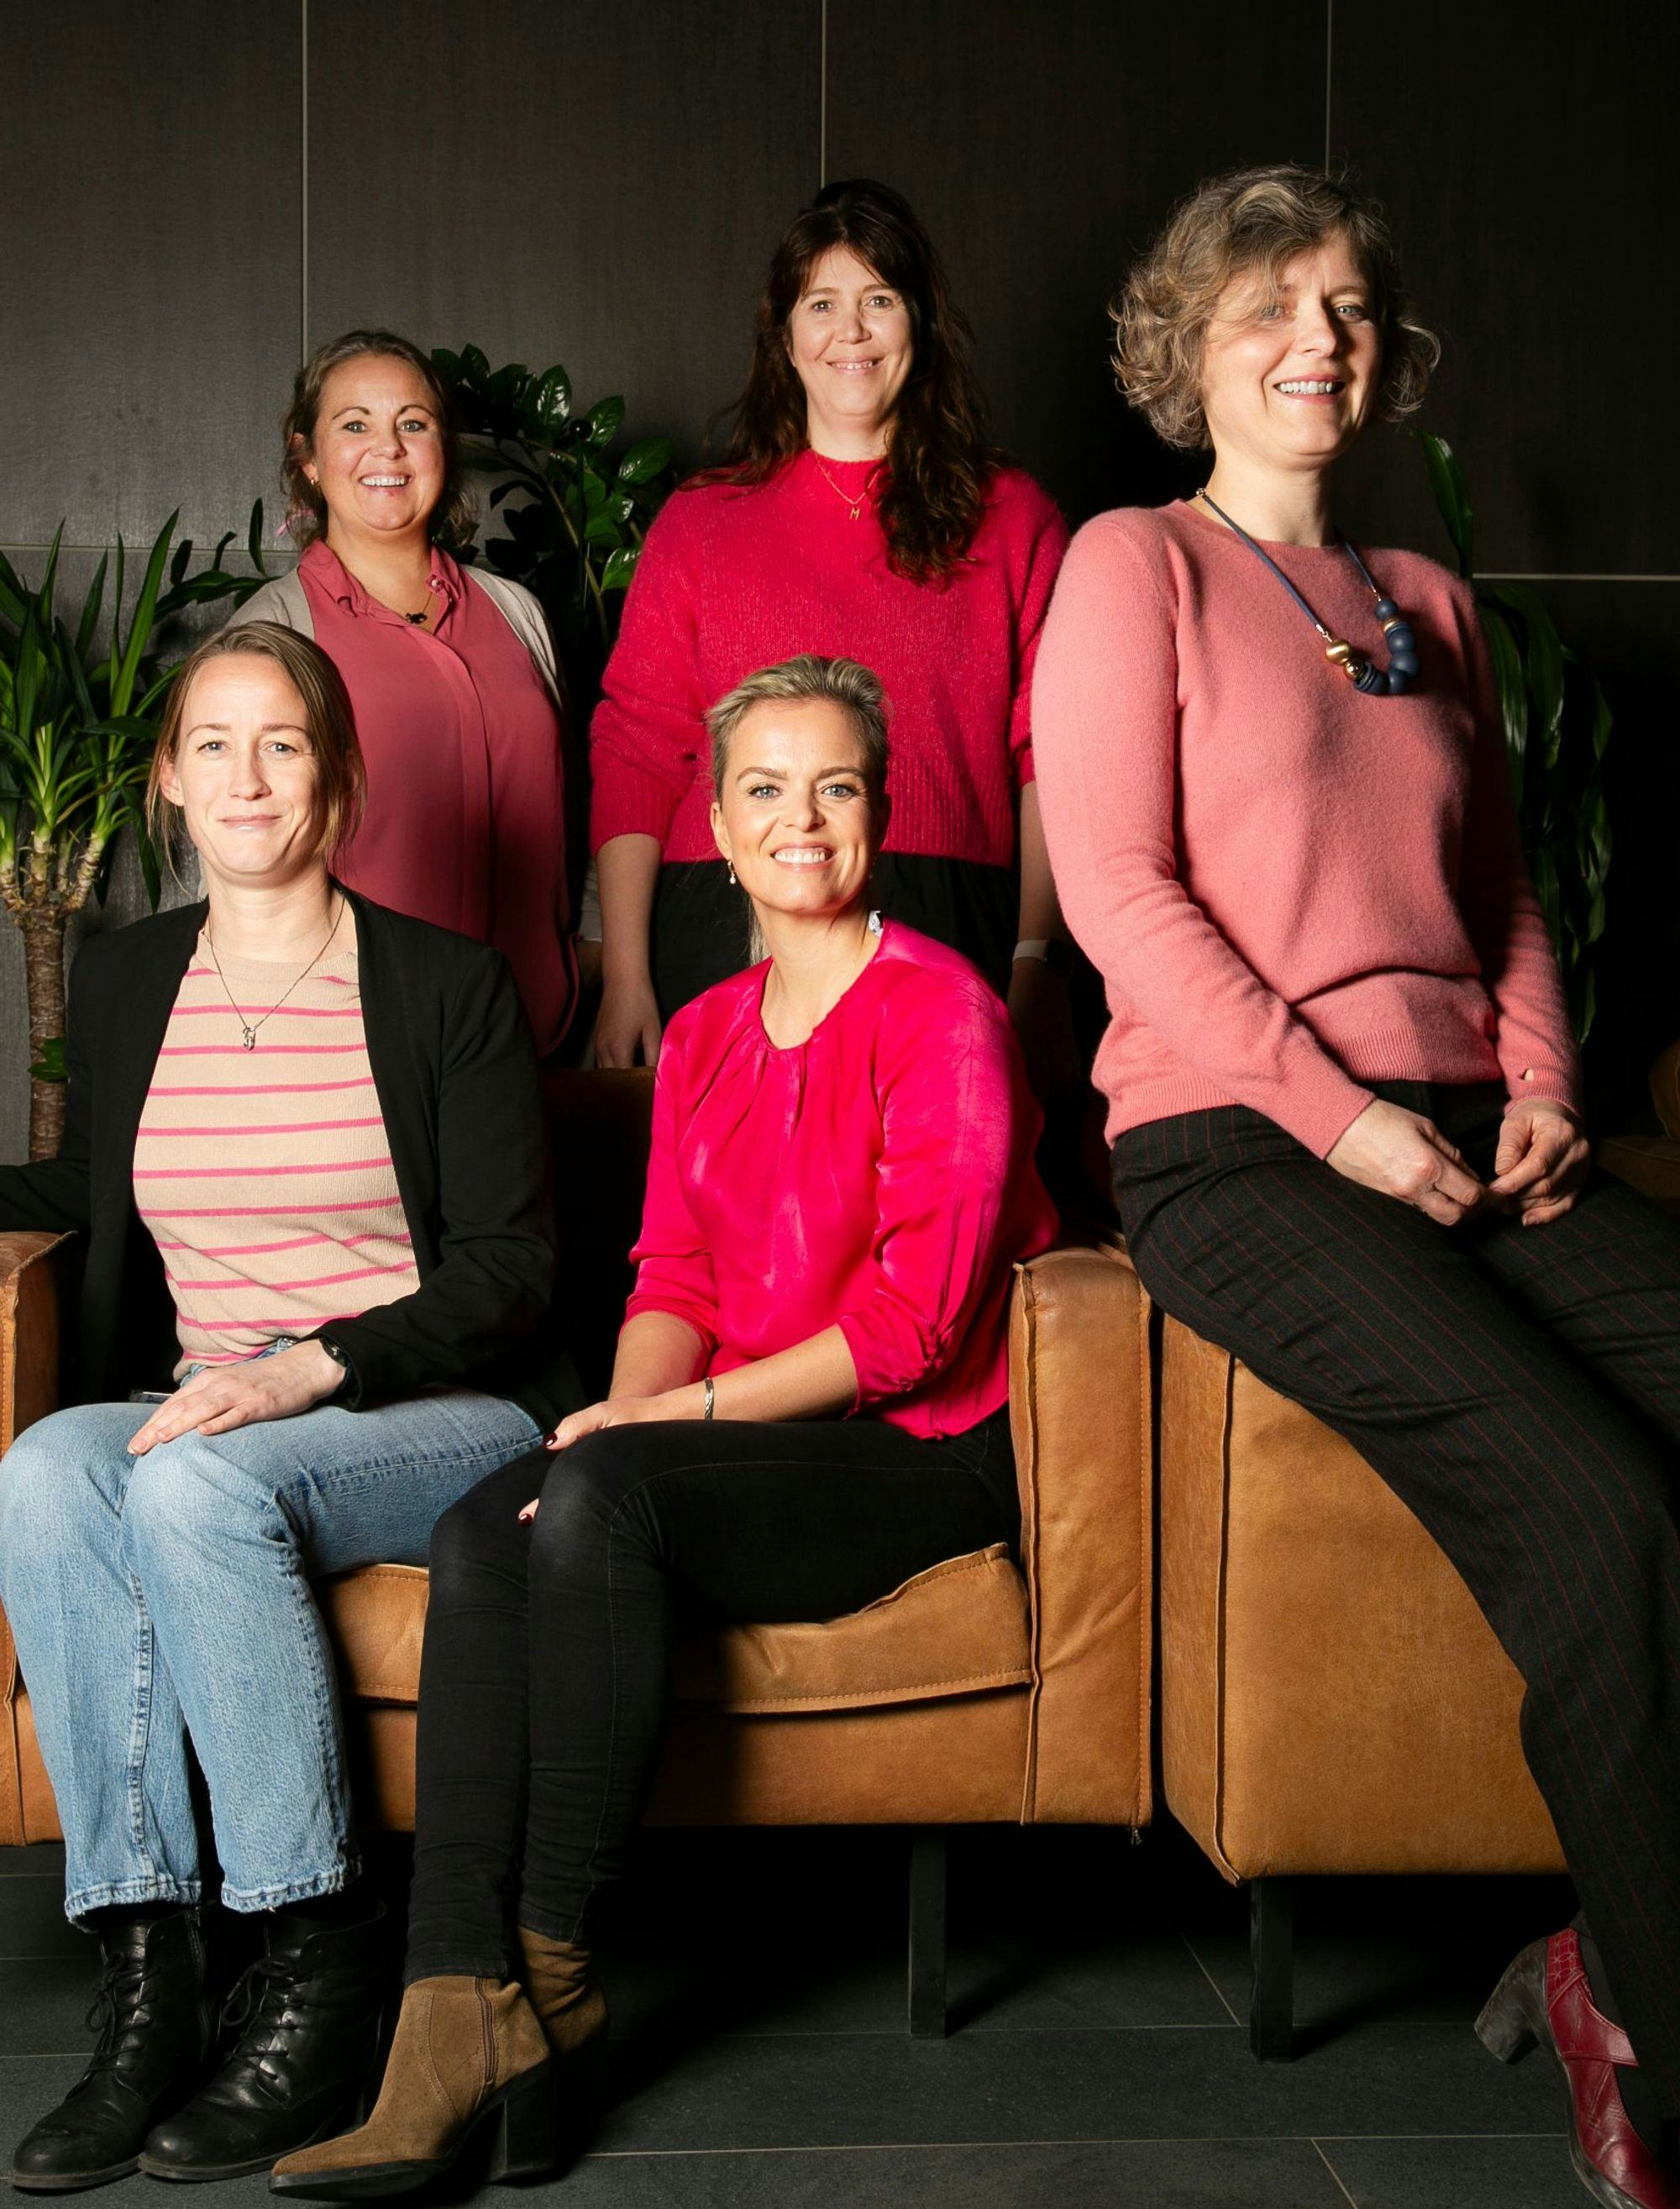 A group of five women, two standing and three seated on a leather couch, all set against a dark interior background with green foliage